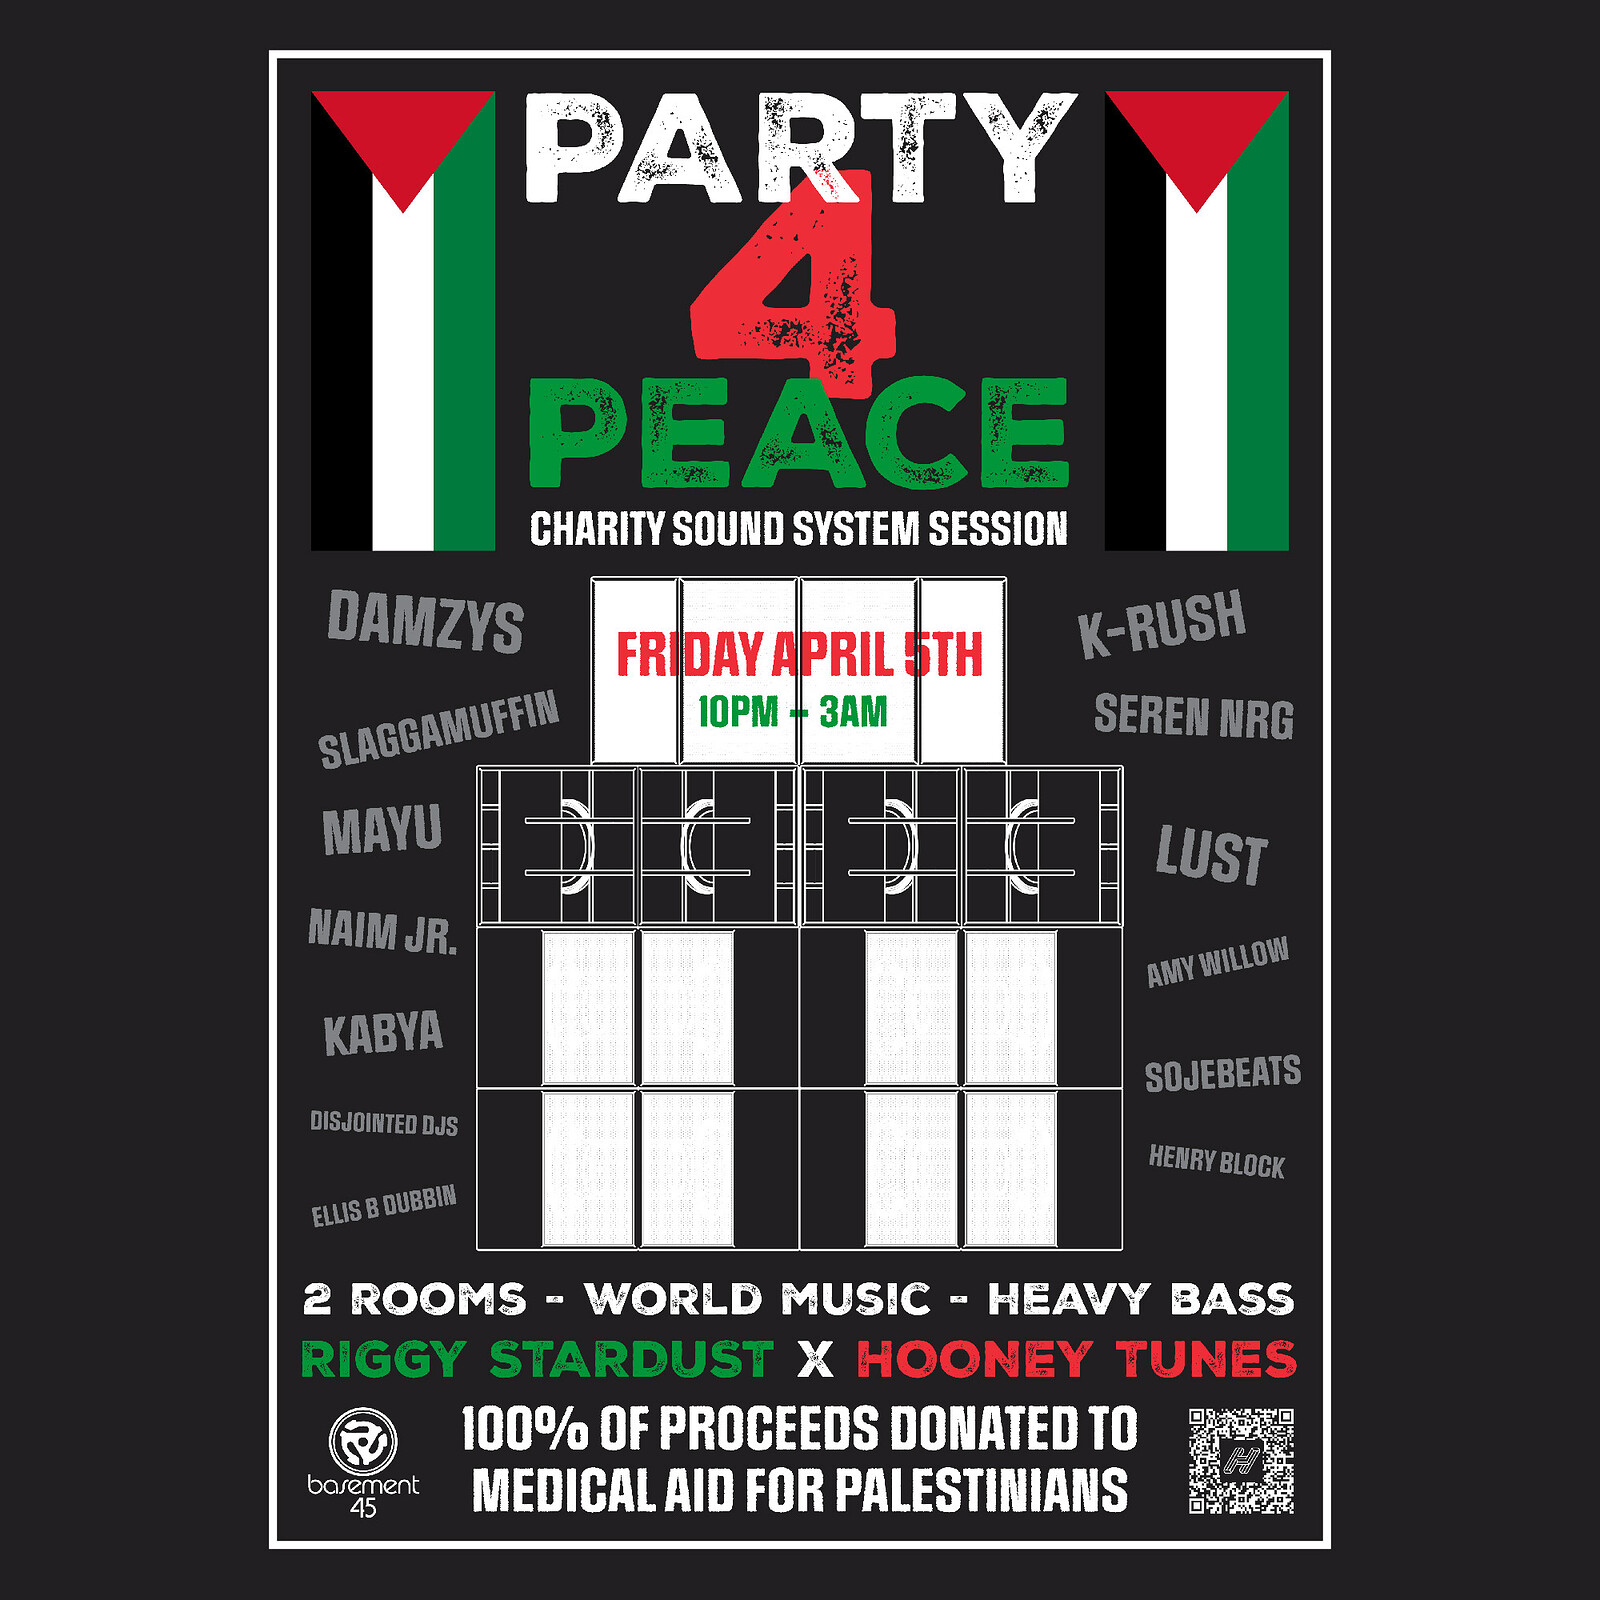 PARTY 4 PEACE: PALESTINE FUNDRAISER at Basement 45